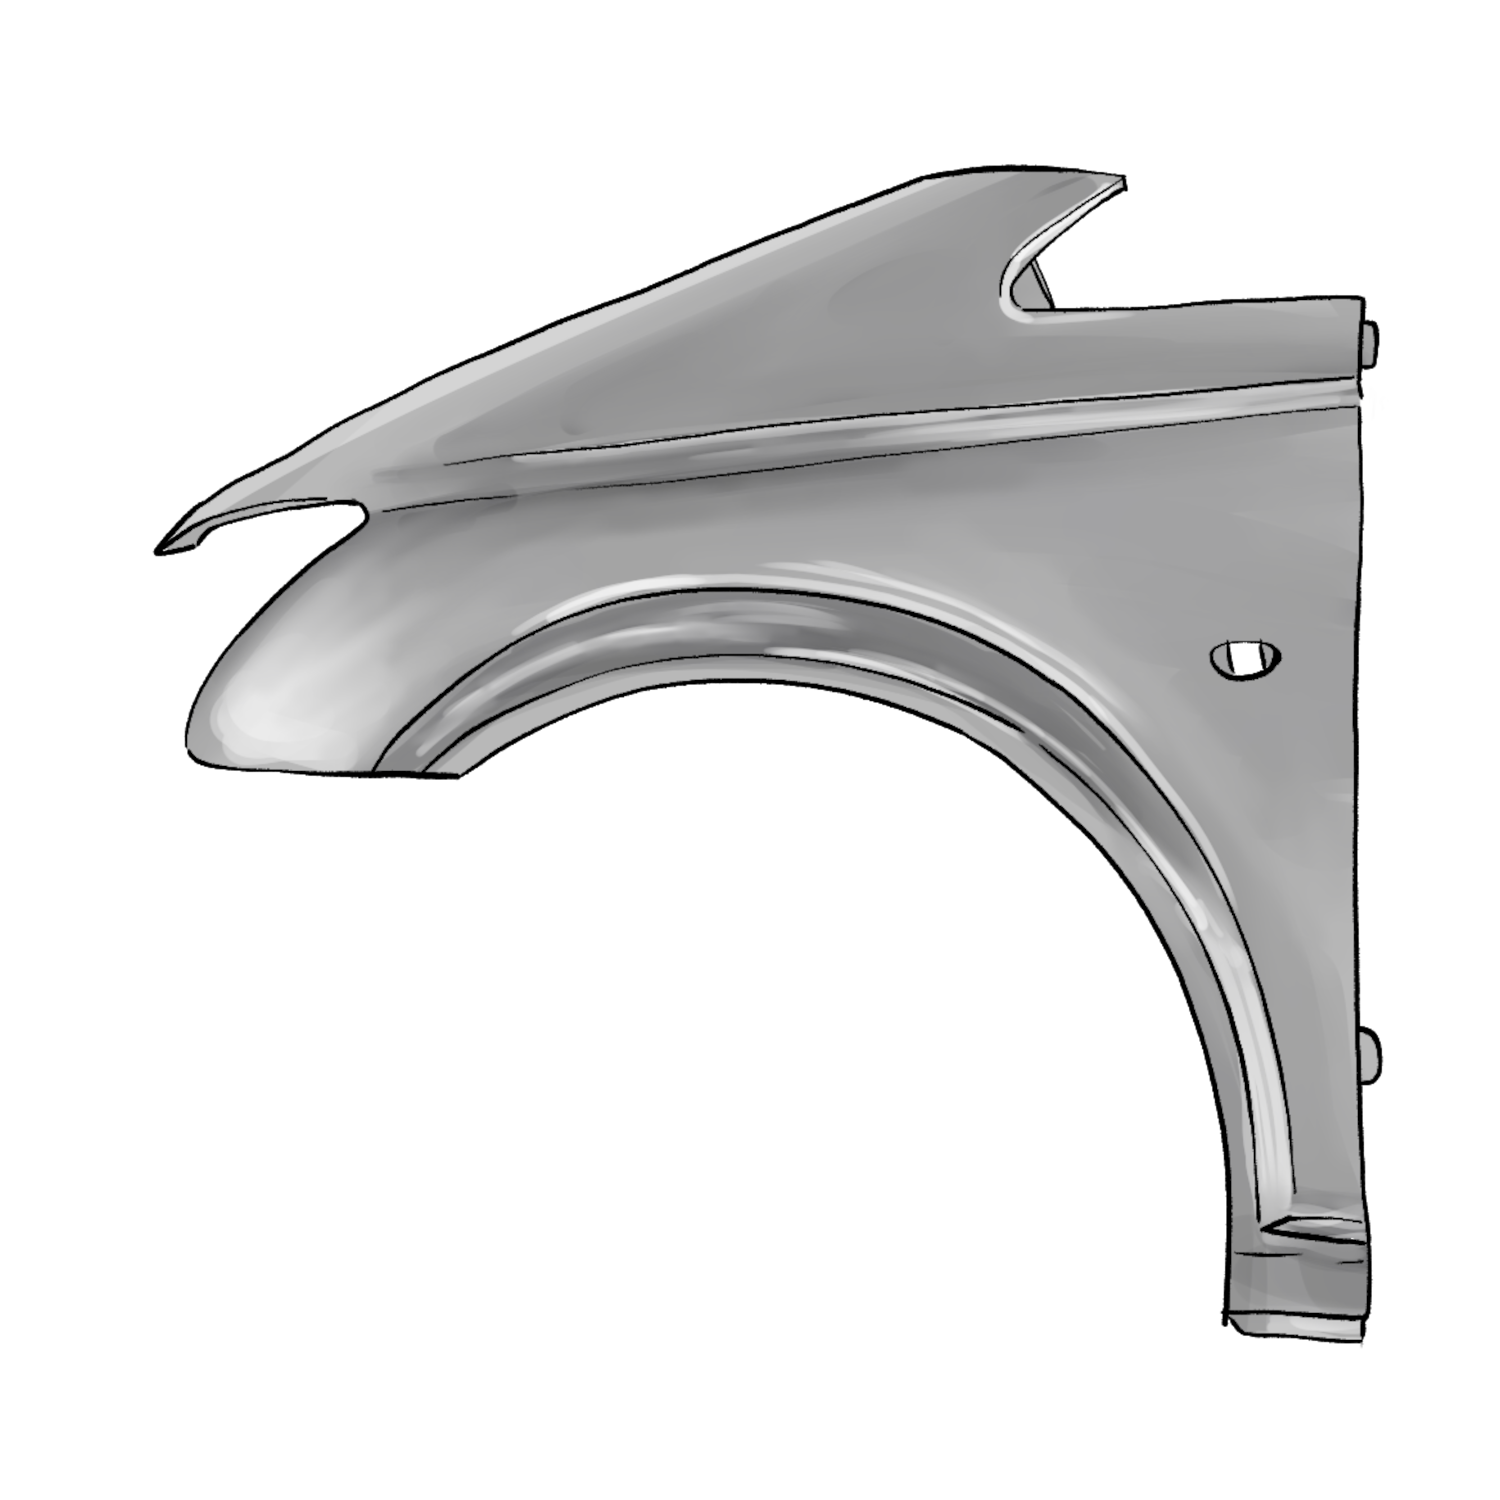  Product image 1 of the product “Mudguard OX7 ”